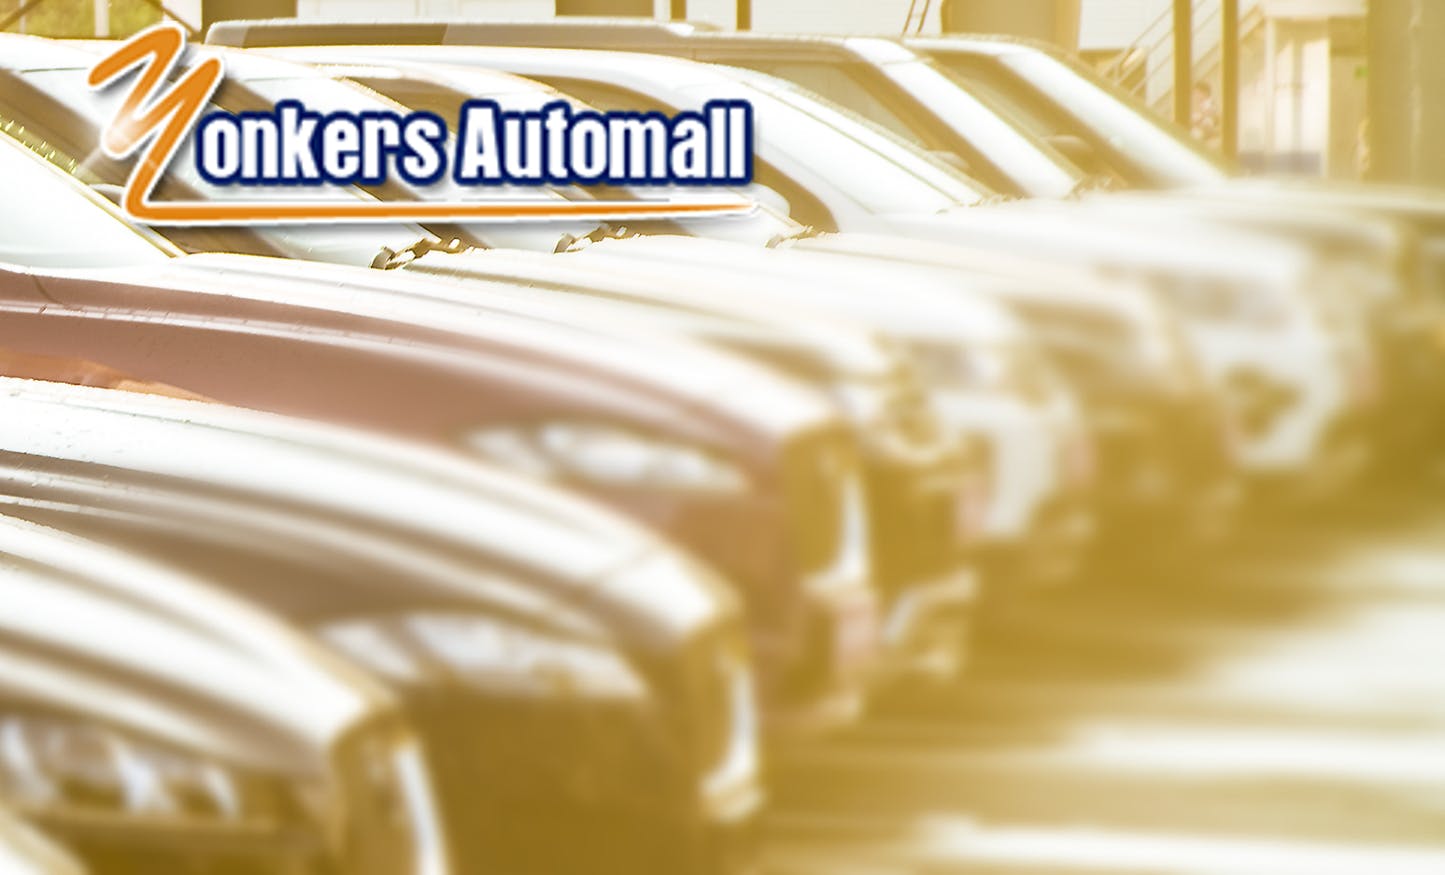 Yonkers Auto Mall: Dealership Finance, Warranty, and Full Review